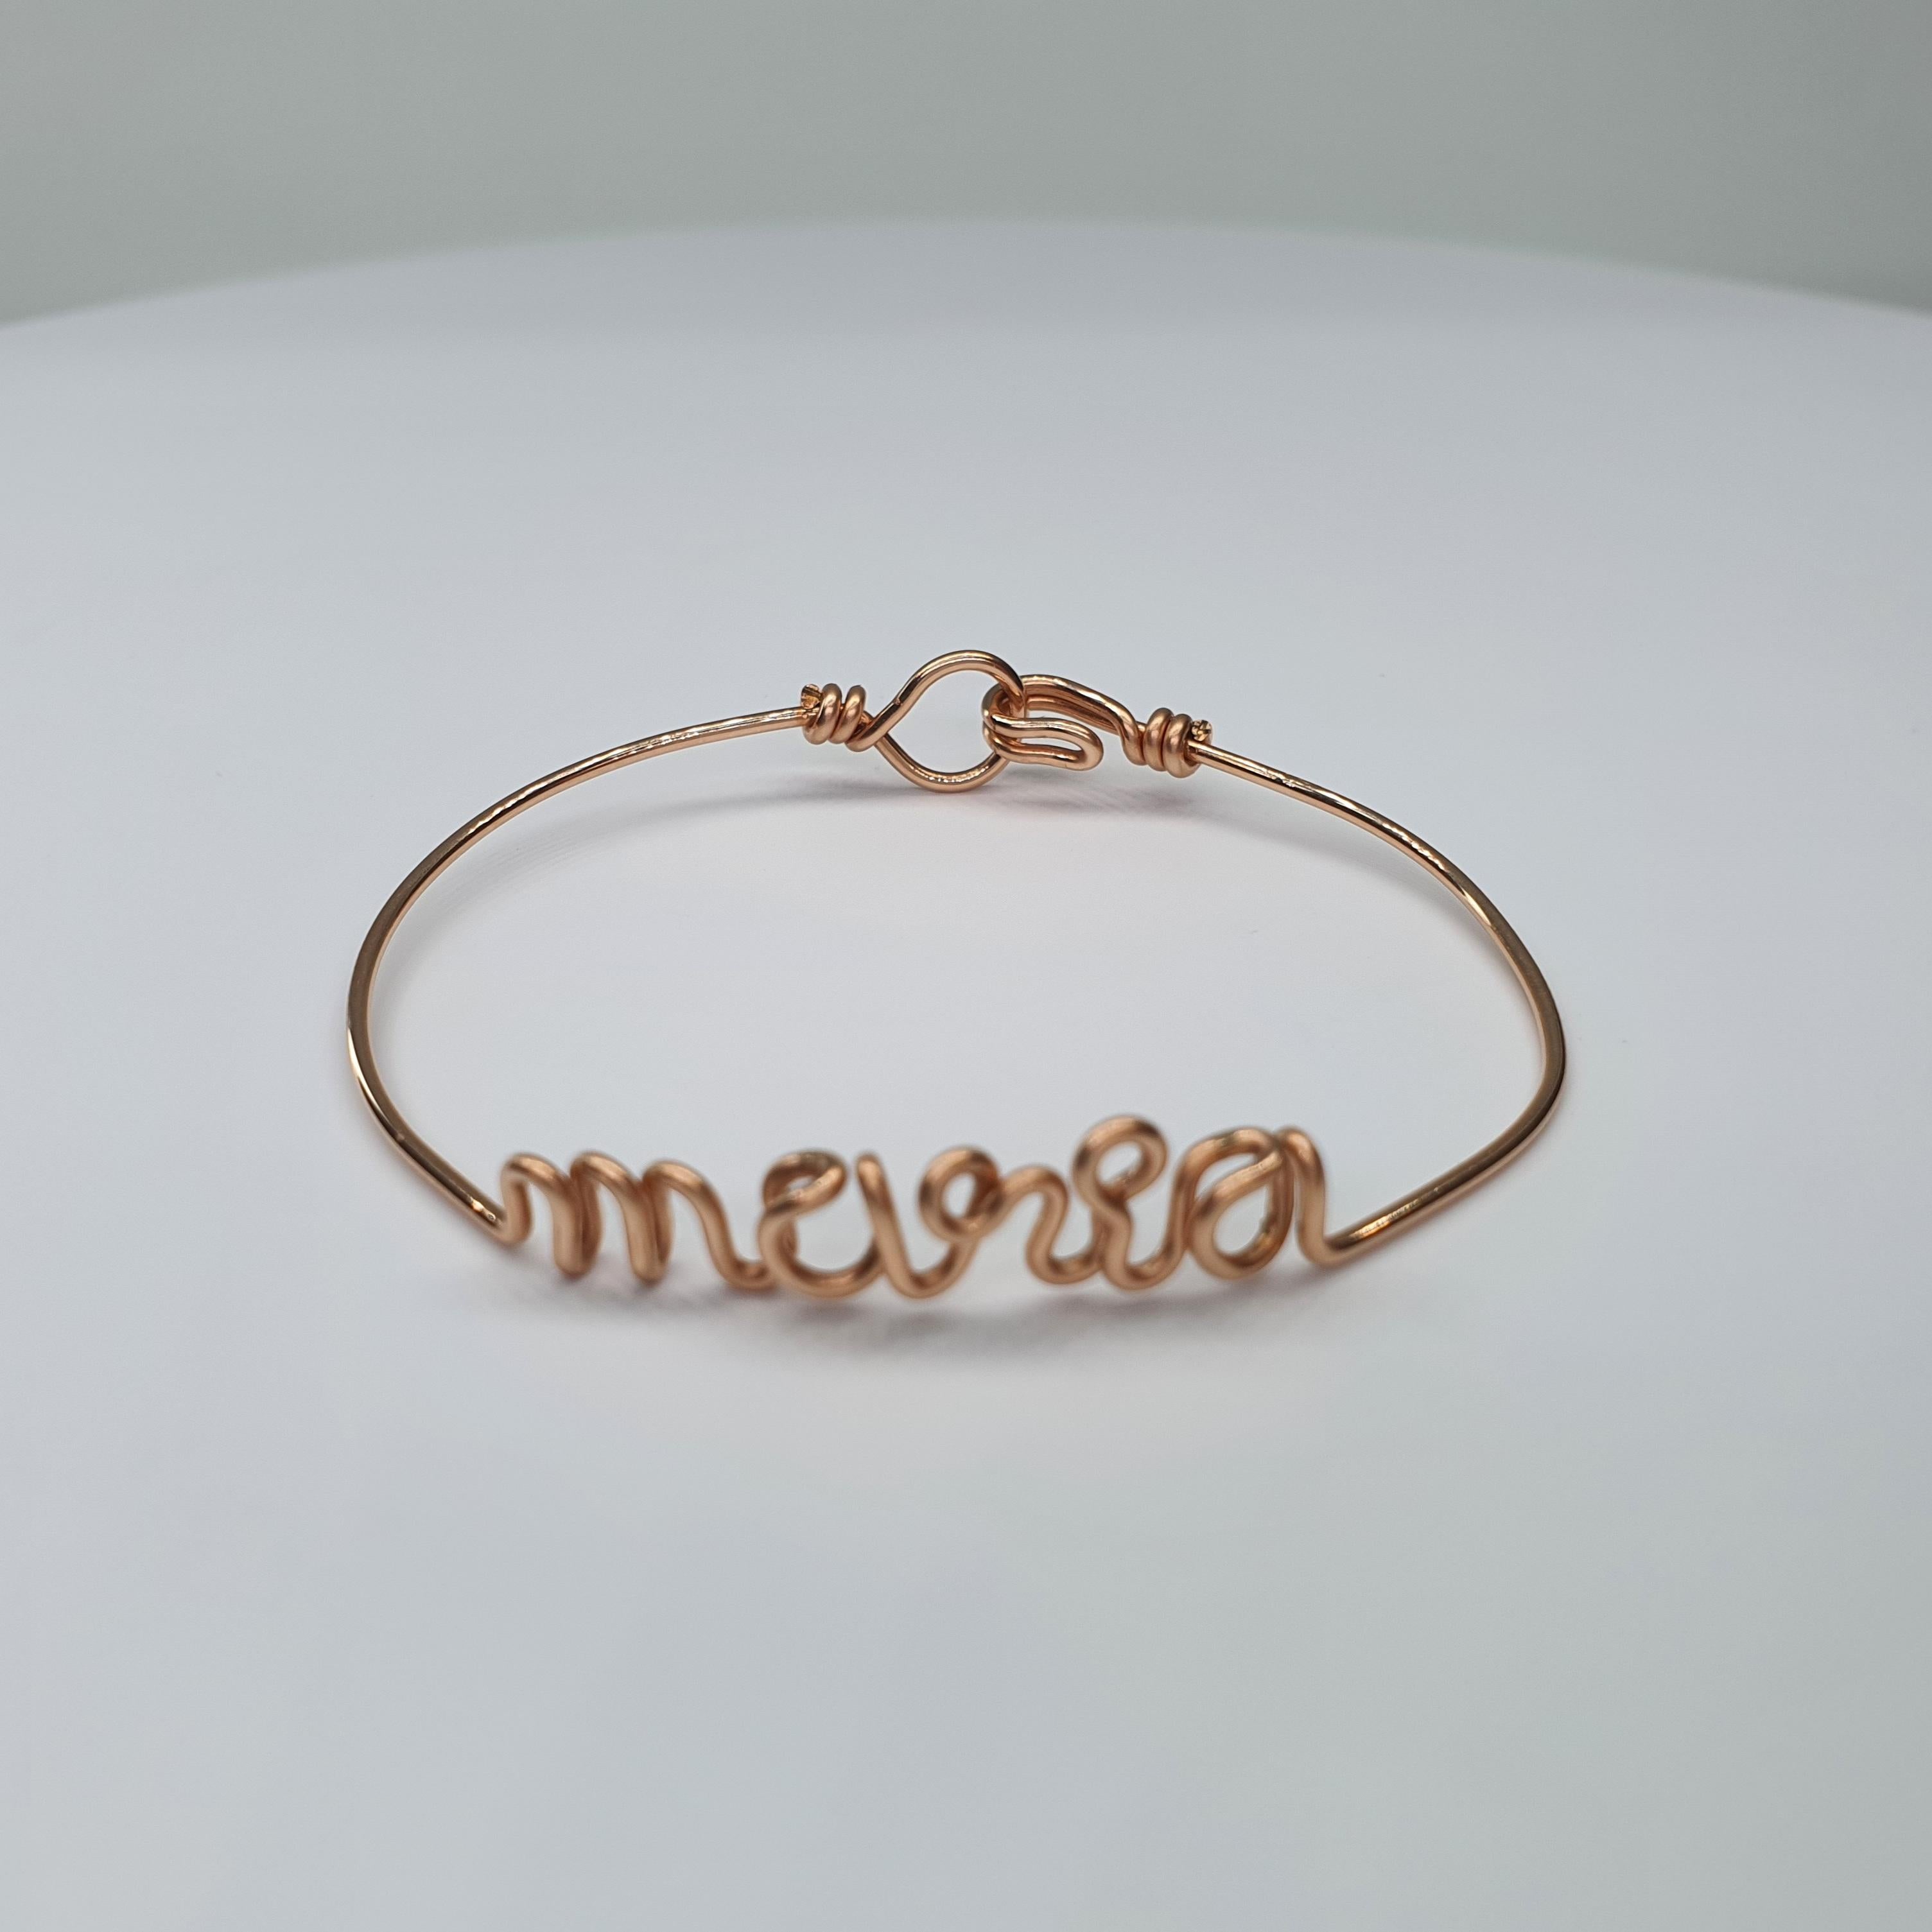 Original Personalised Gold Filled Rose 14K Wire Child Bangle Bracelet

These personalized jewelry are made out of 14K yellow or pink goldfilled wire, sterling silver. Each piece is handcrafted.
So many feelings and emotions can be expressed in